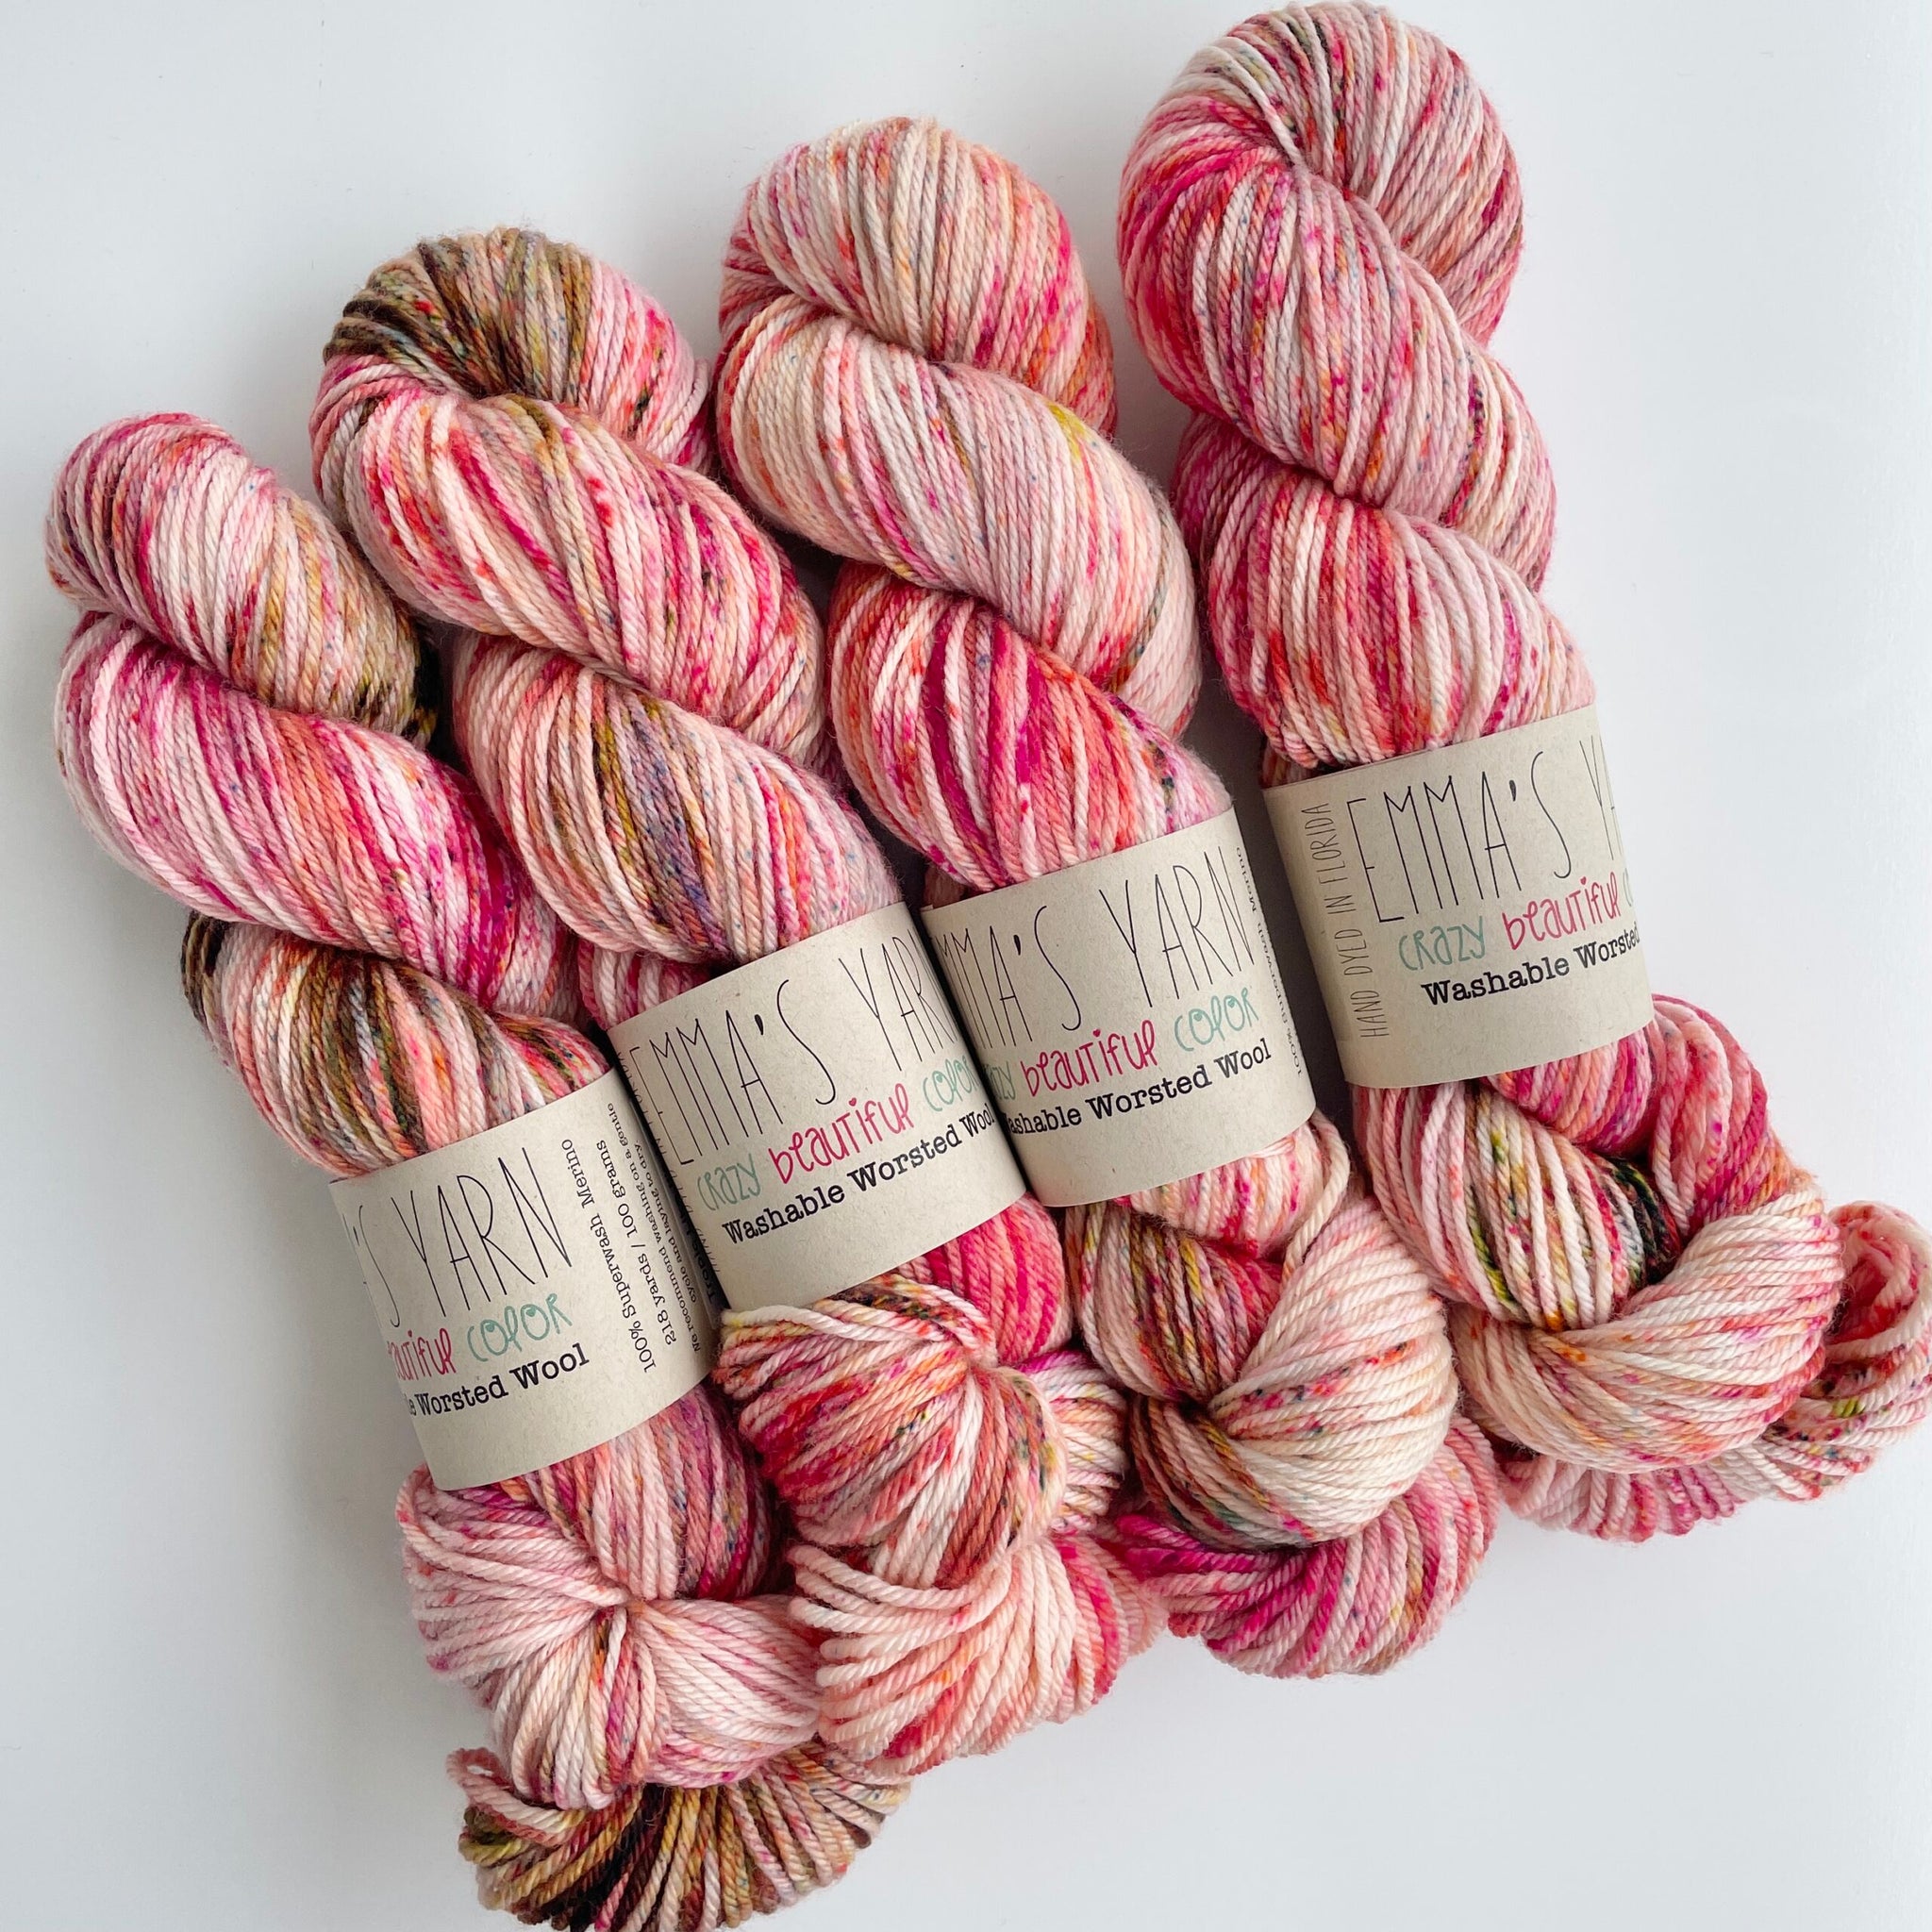 Tropic Like It's Hot - Washable Worsted Wool